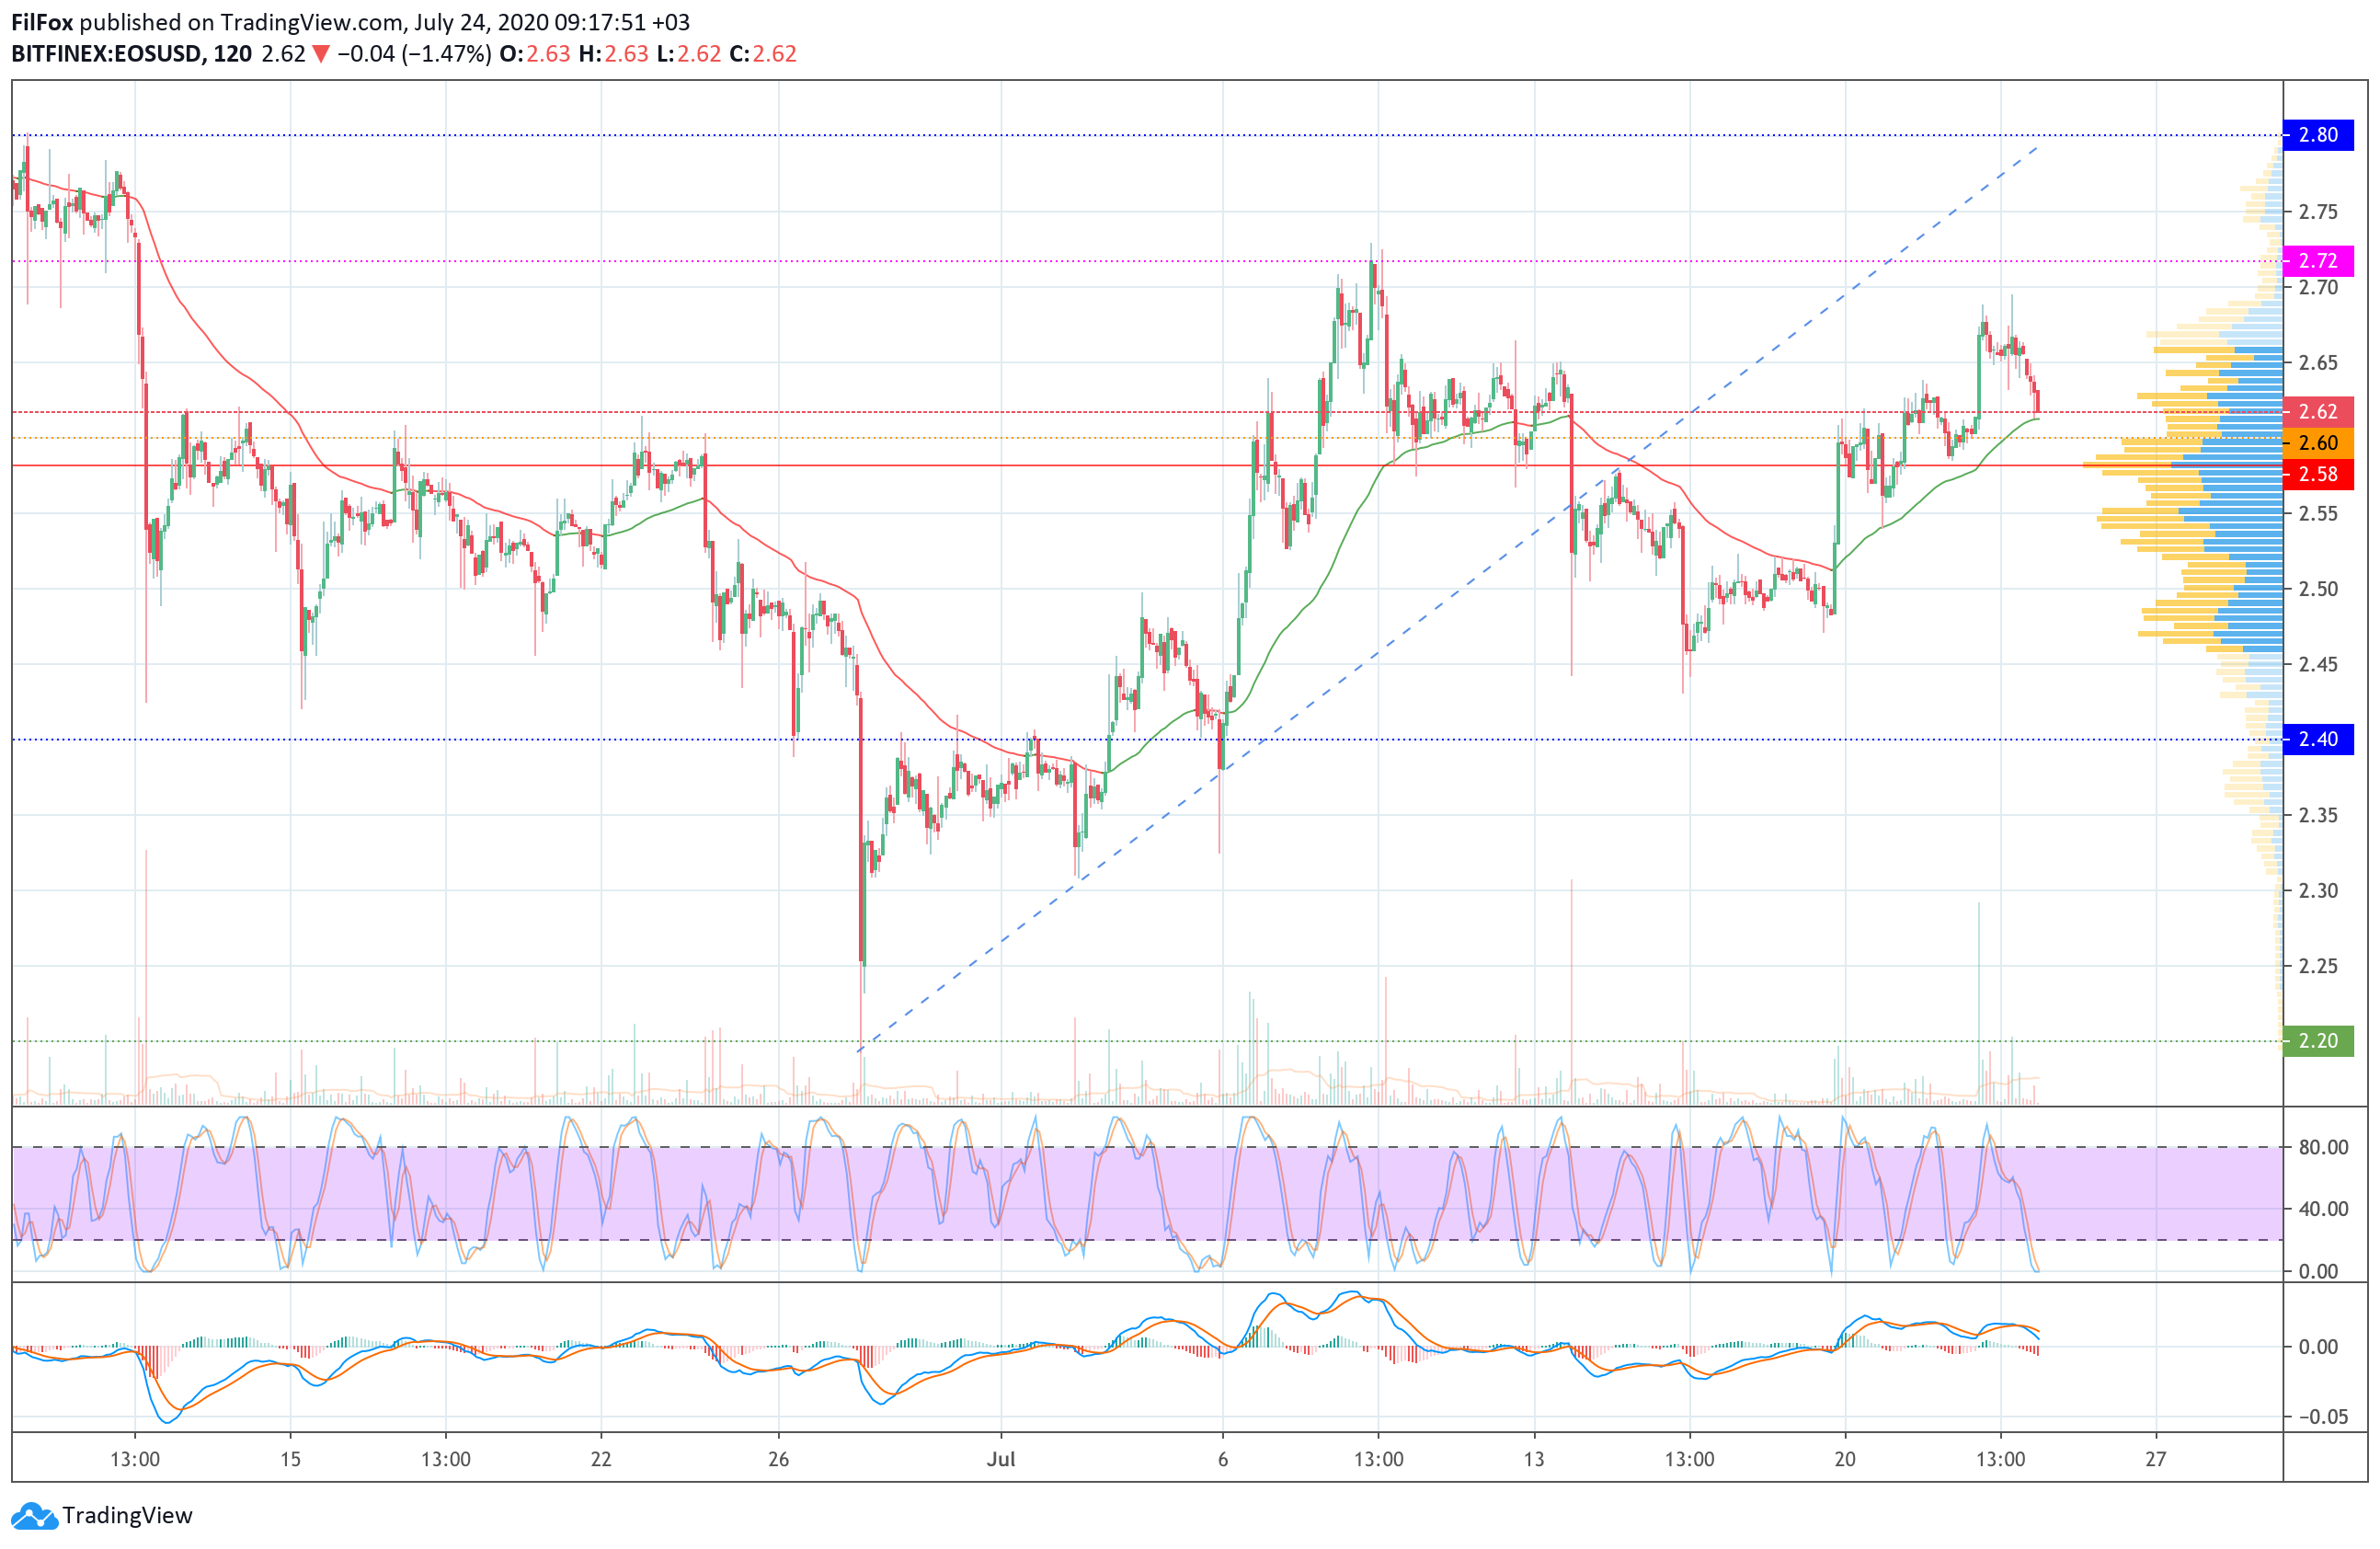 Analysis of the prices of Bitcoin Cash, Cardano, Litecoin, EOS and Stellar for 07/24/2020